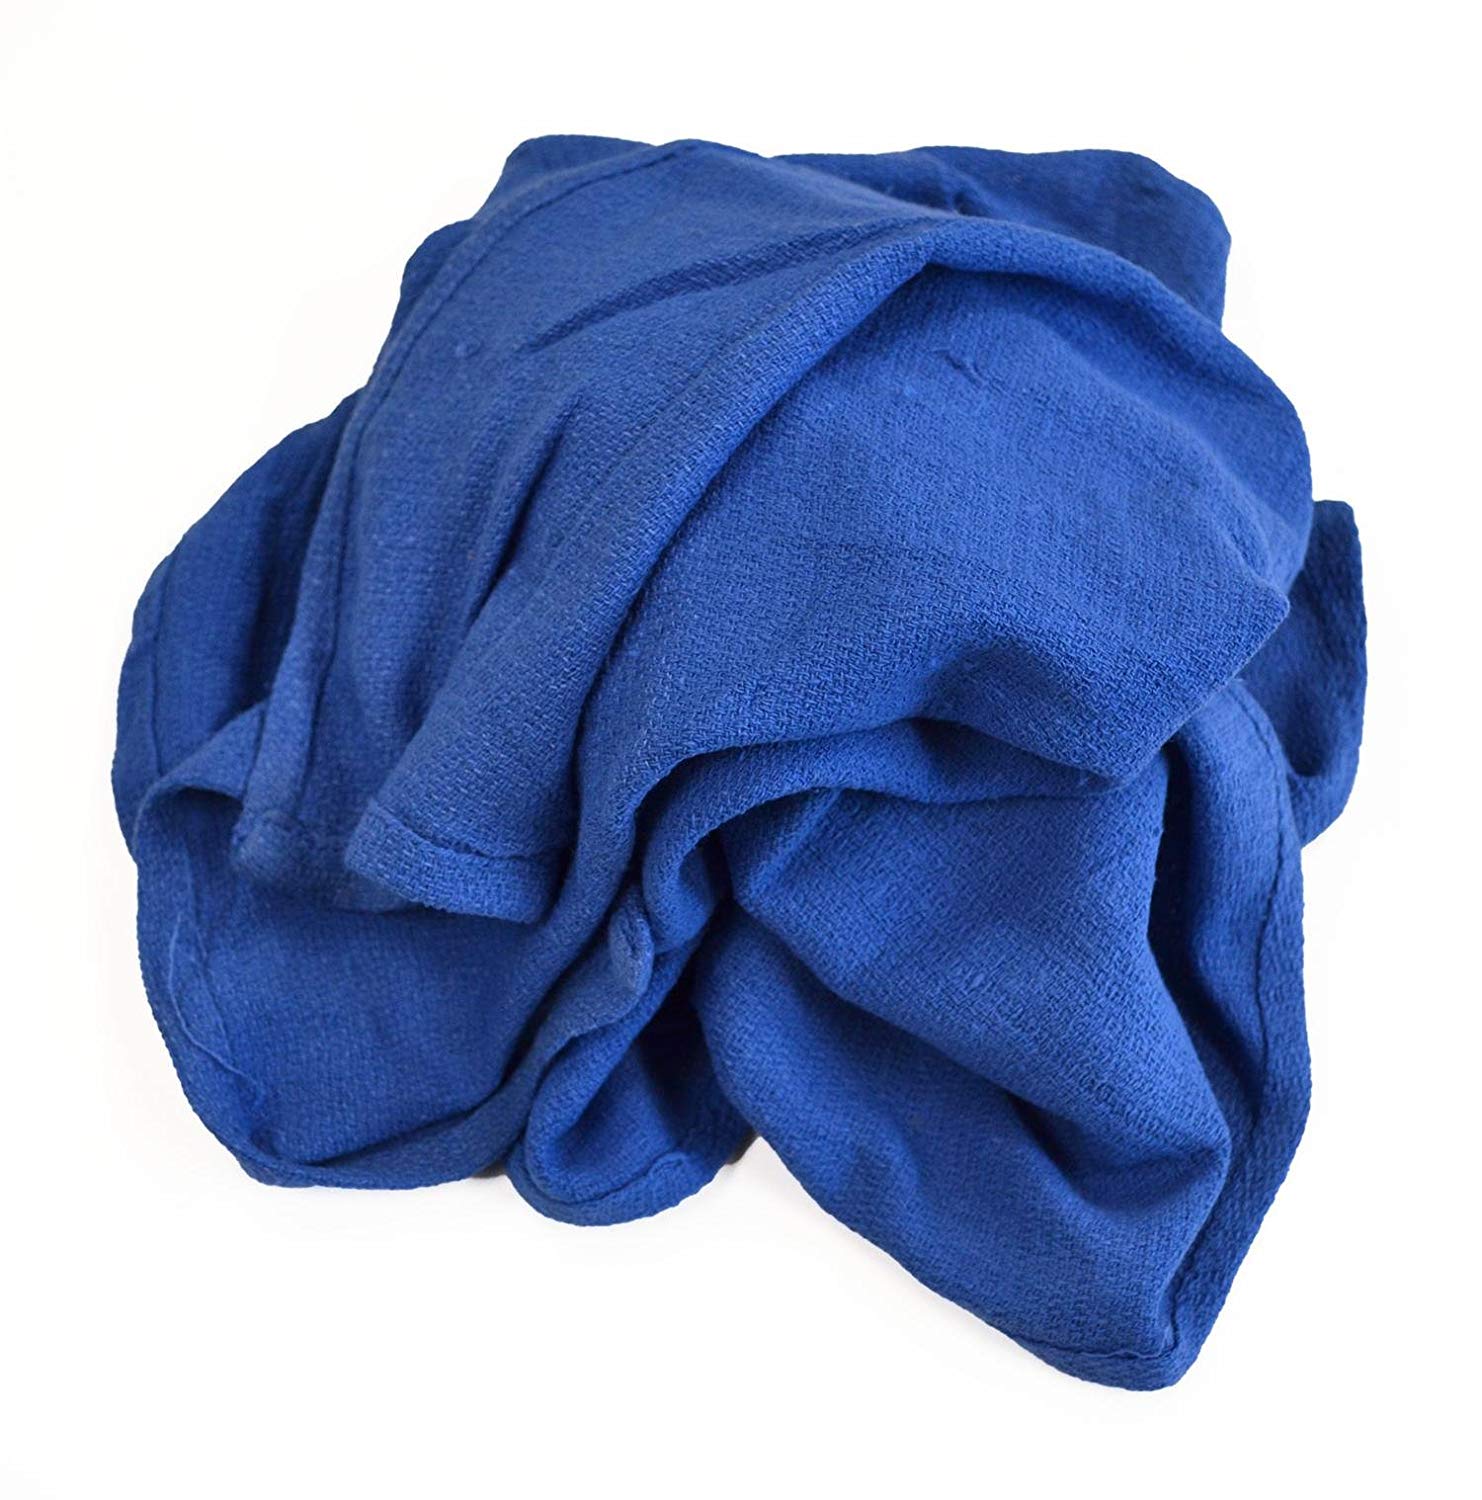 Green Huck Towels, Surgical Rags in Bulk